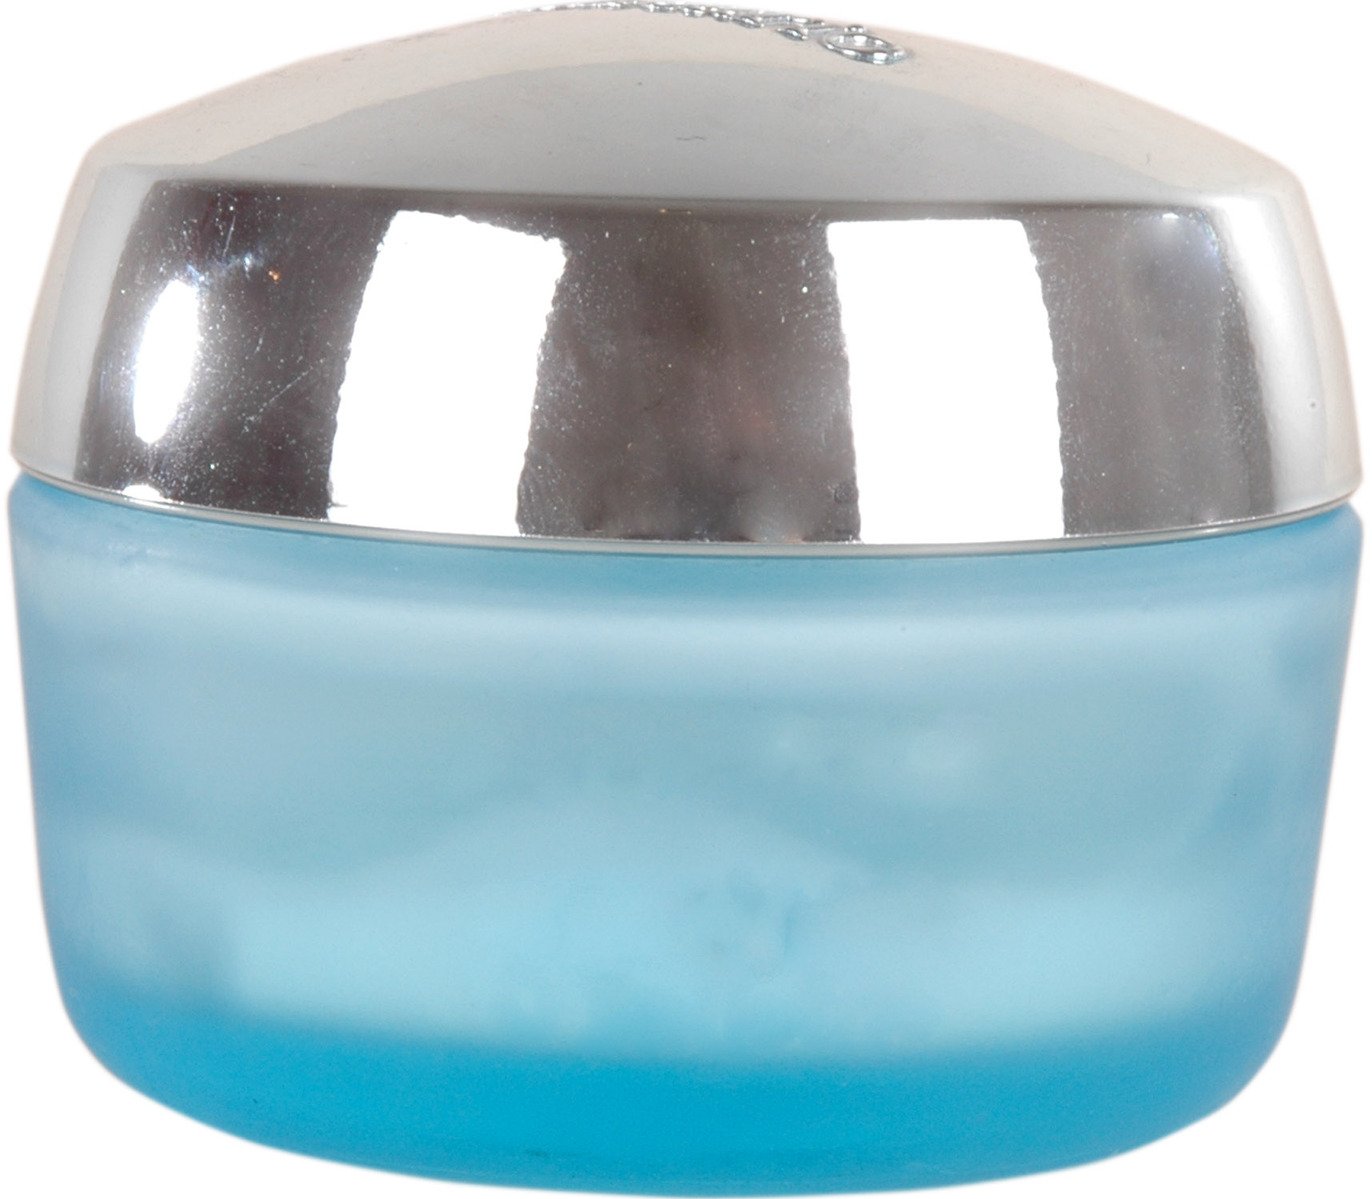 the lid of a container with a light blue face and body